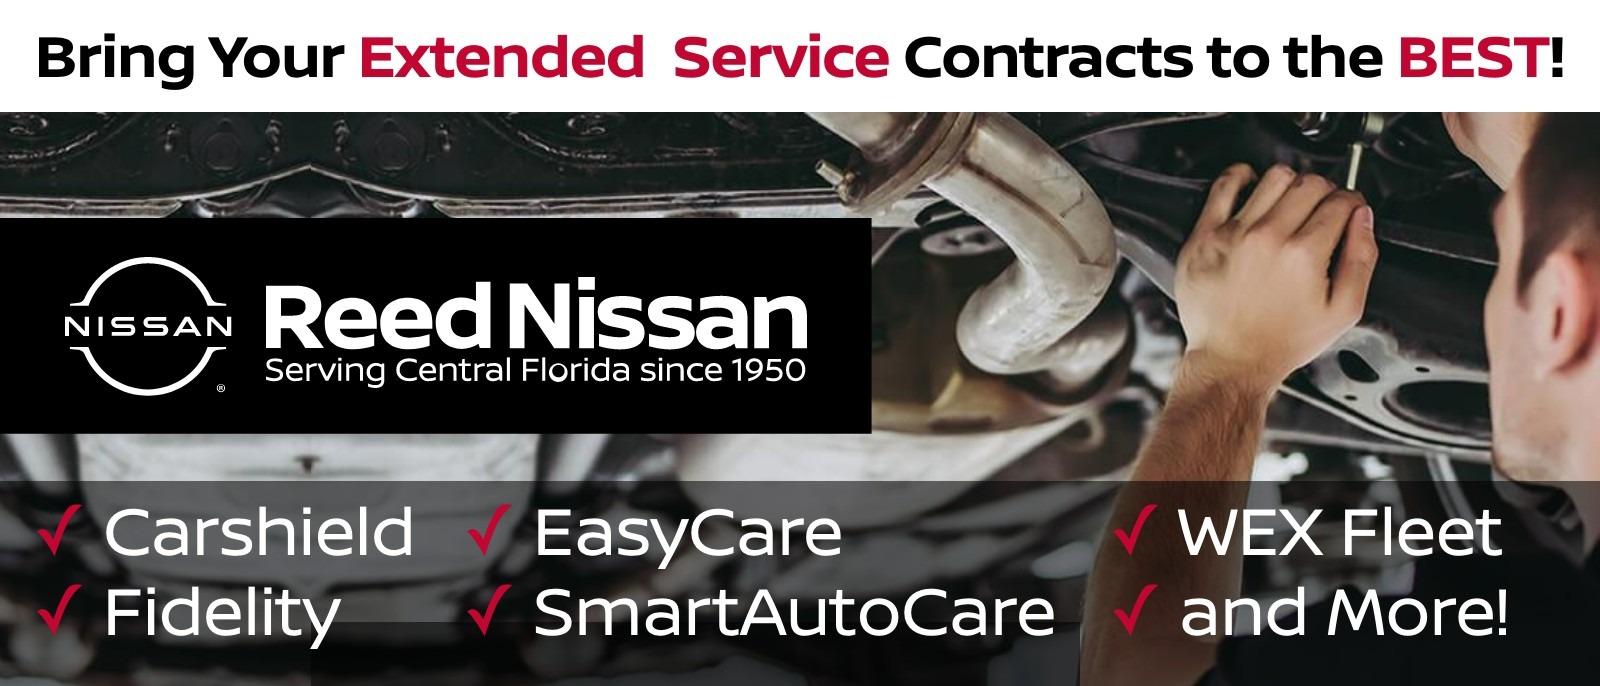 3rd party service warranty banner